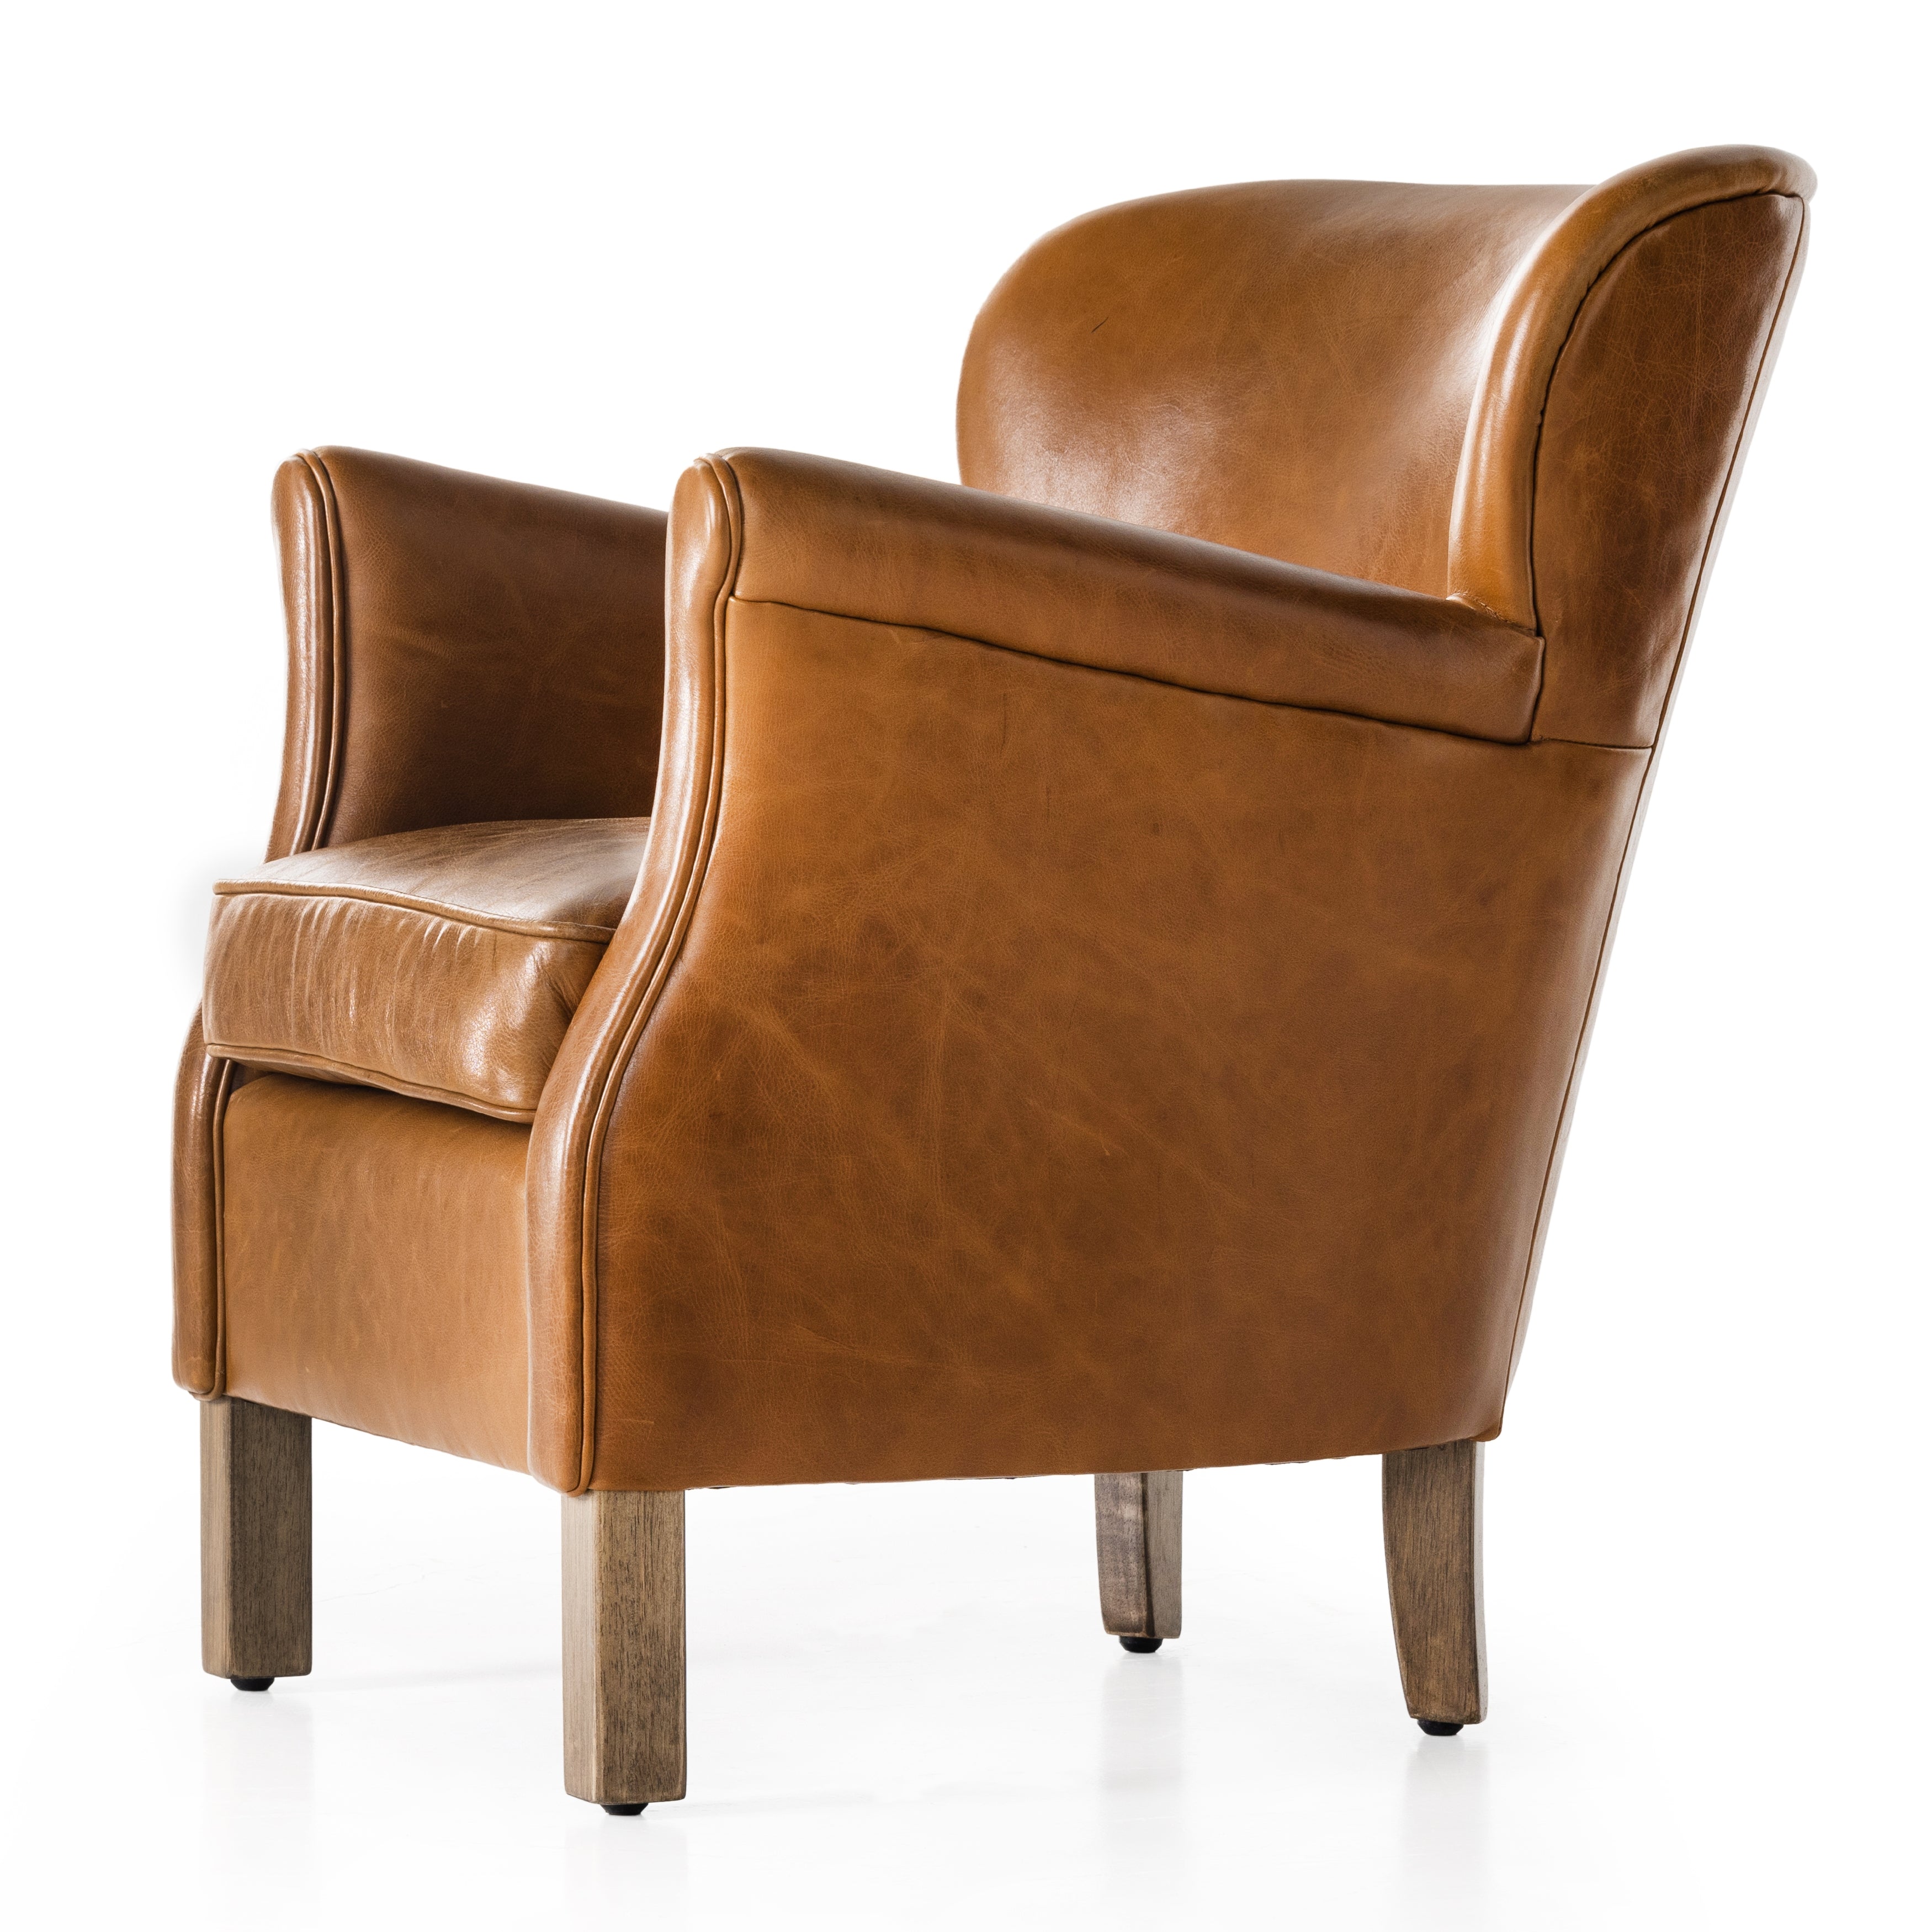 A statement seat all its own. This regal Parisian club chair is honored with a profound scooped back and rolled arms in classic, lived in tan top-grain leather. Amethyst Home provides interior design, new construction, custom furniture, and area rugs in the Calabasas metro area.